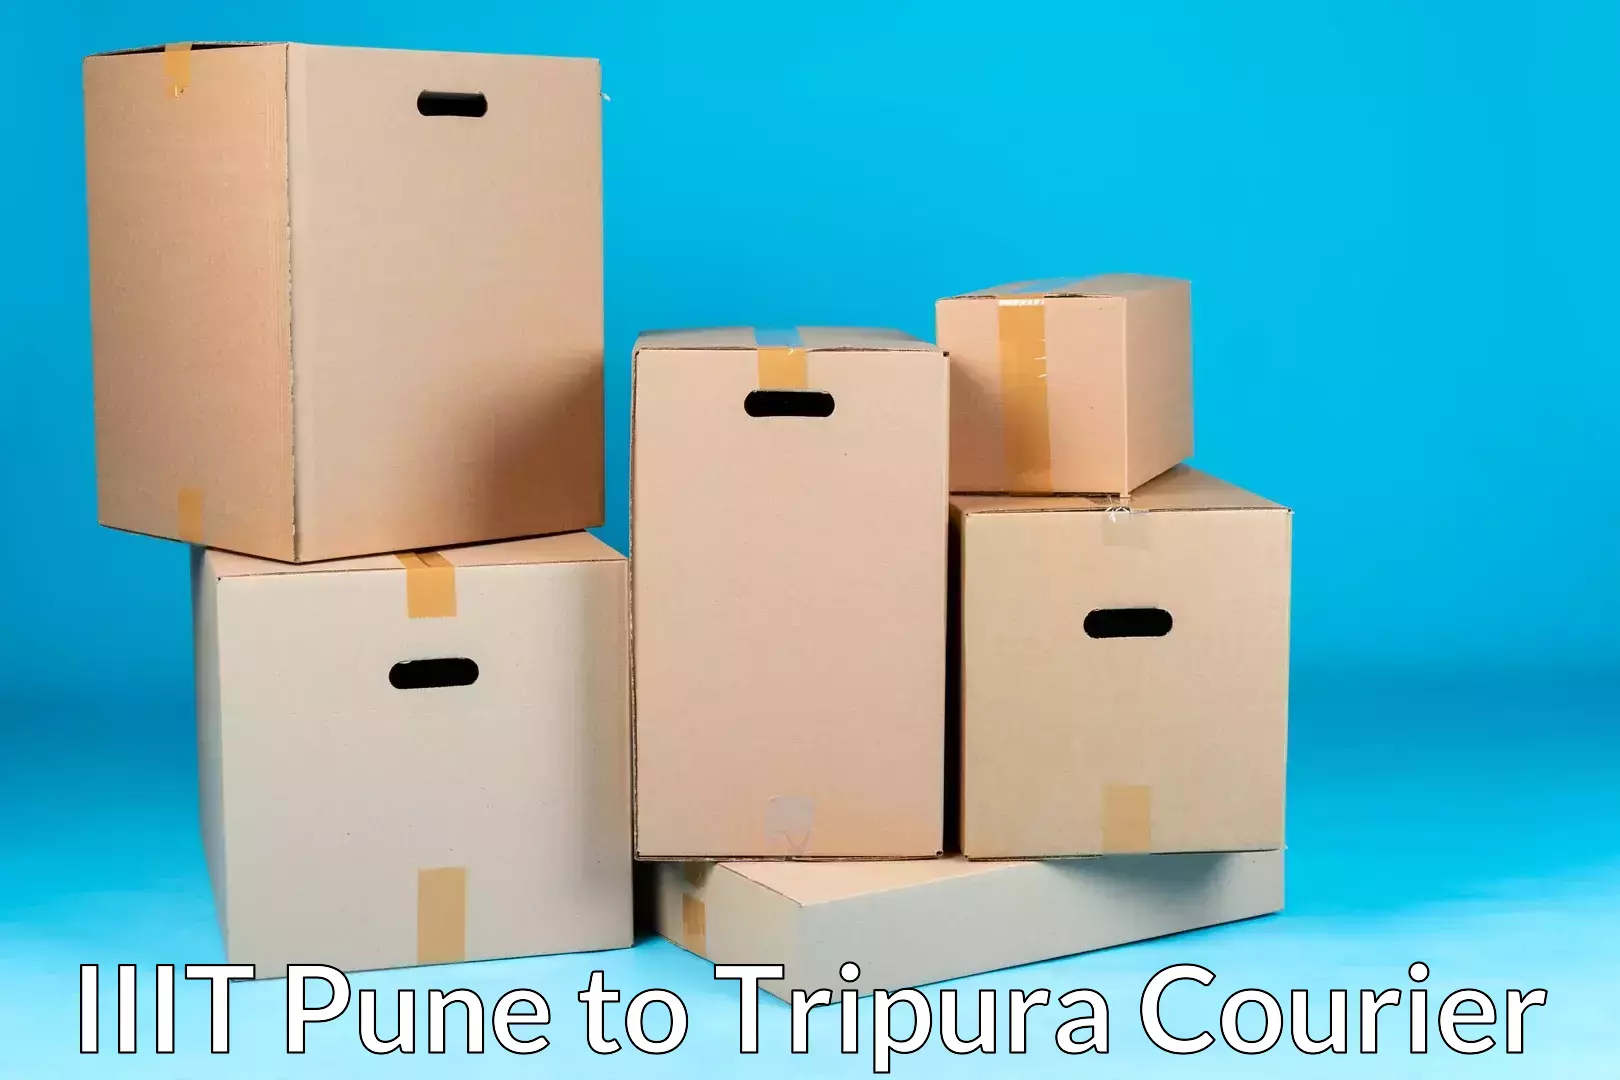 Budget-friendly movers IIIT Pune to Tripura